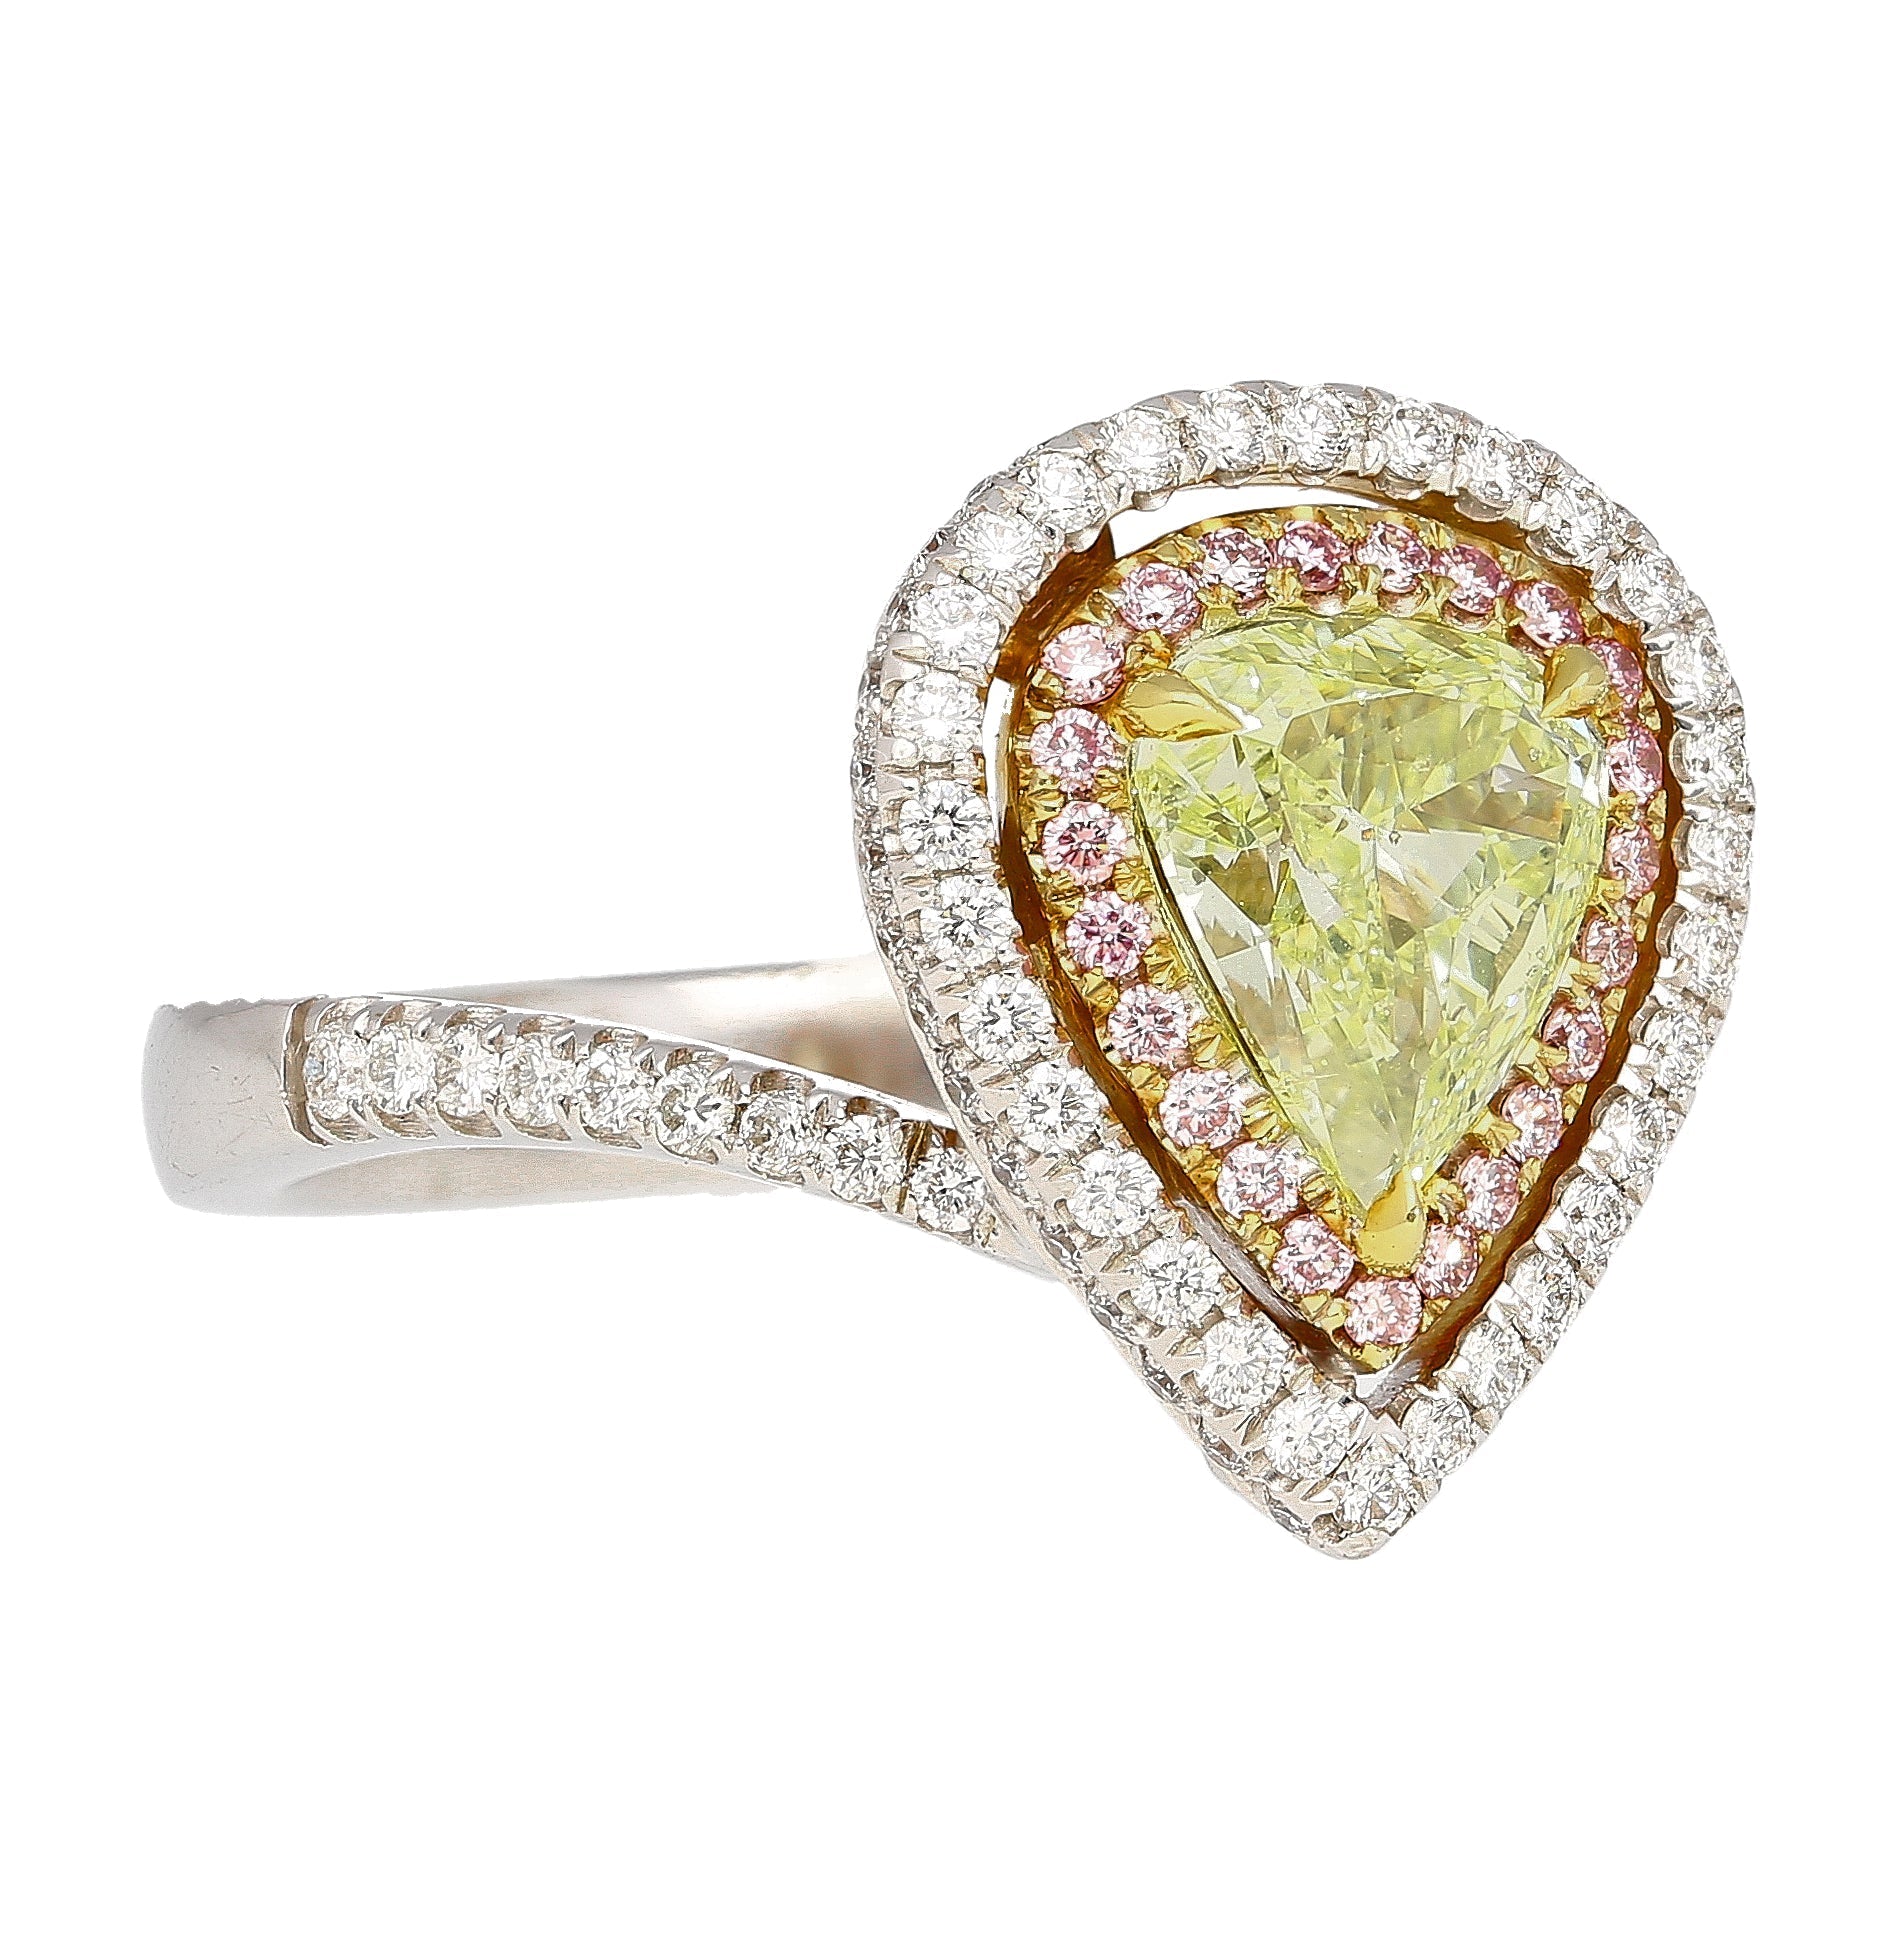 GIA-1_25CT-Pear-Cut-Fancy-Green-Yellow-Diamond-18K-Tri-Colored-Gold-Bypass-Ring-Rings-2.jpg